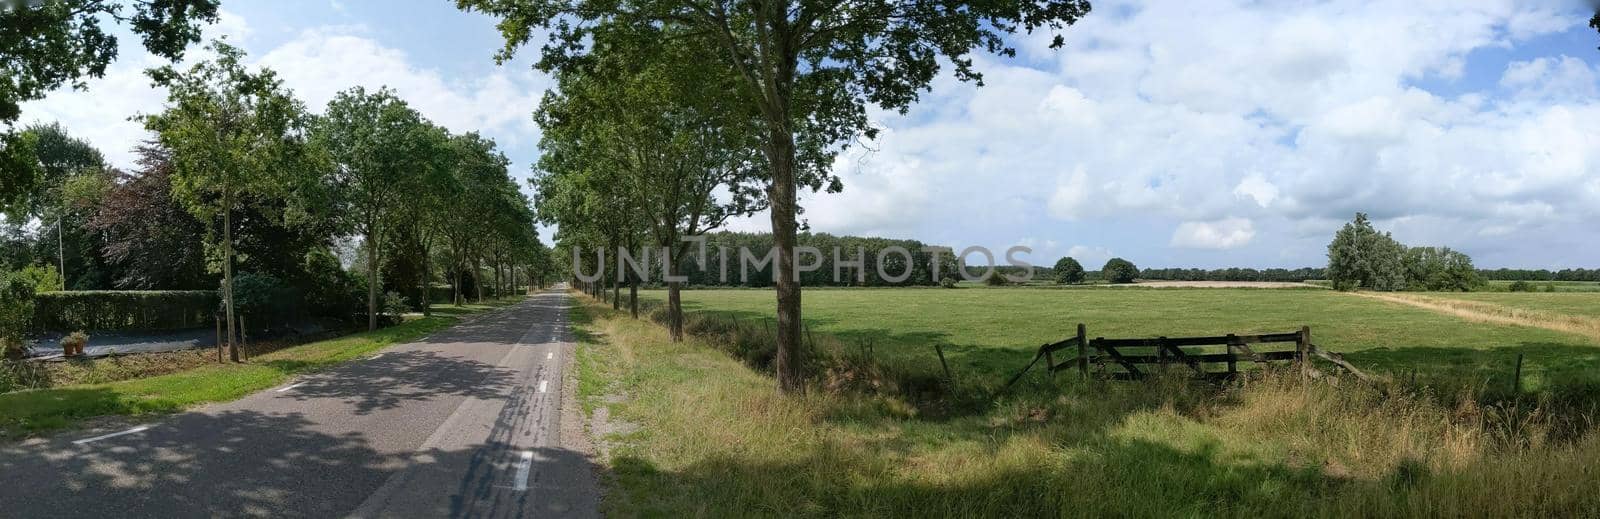 Panoramic landscape around Rijs in Friesland The Netherlands